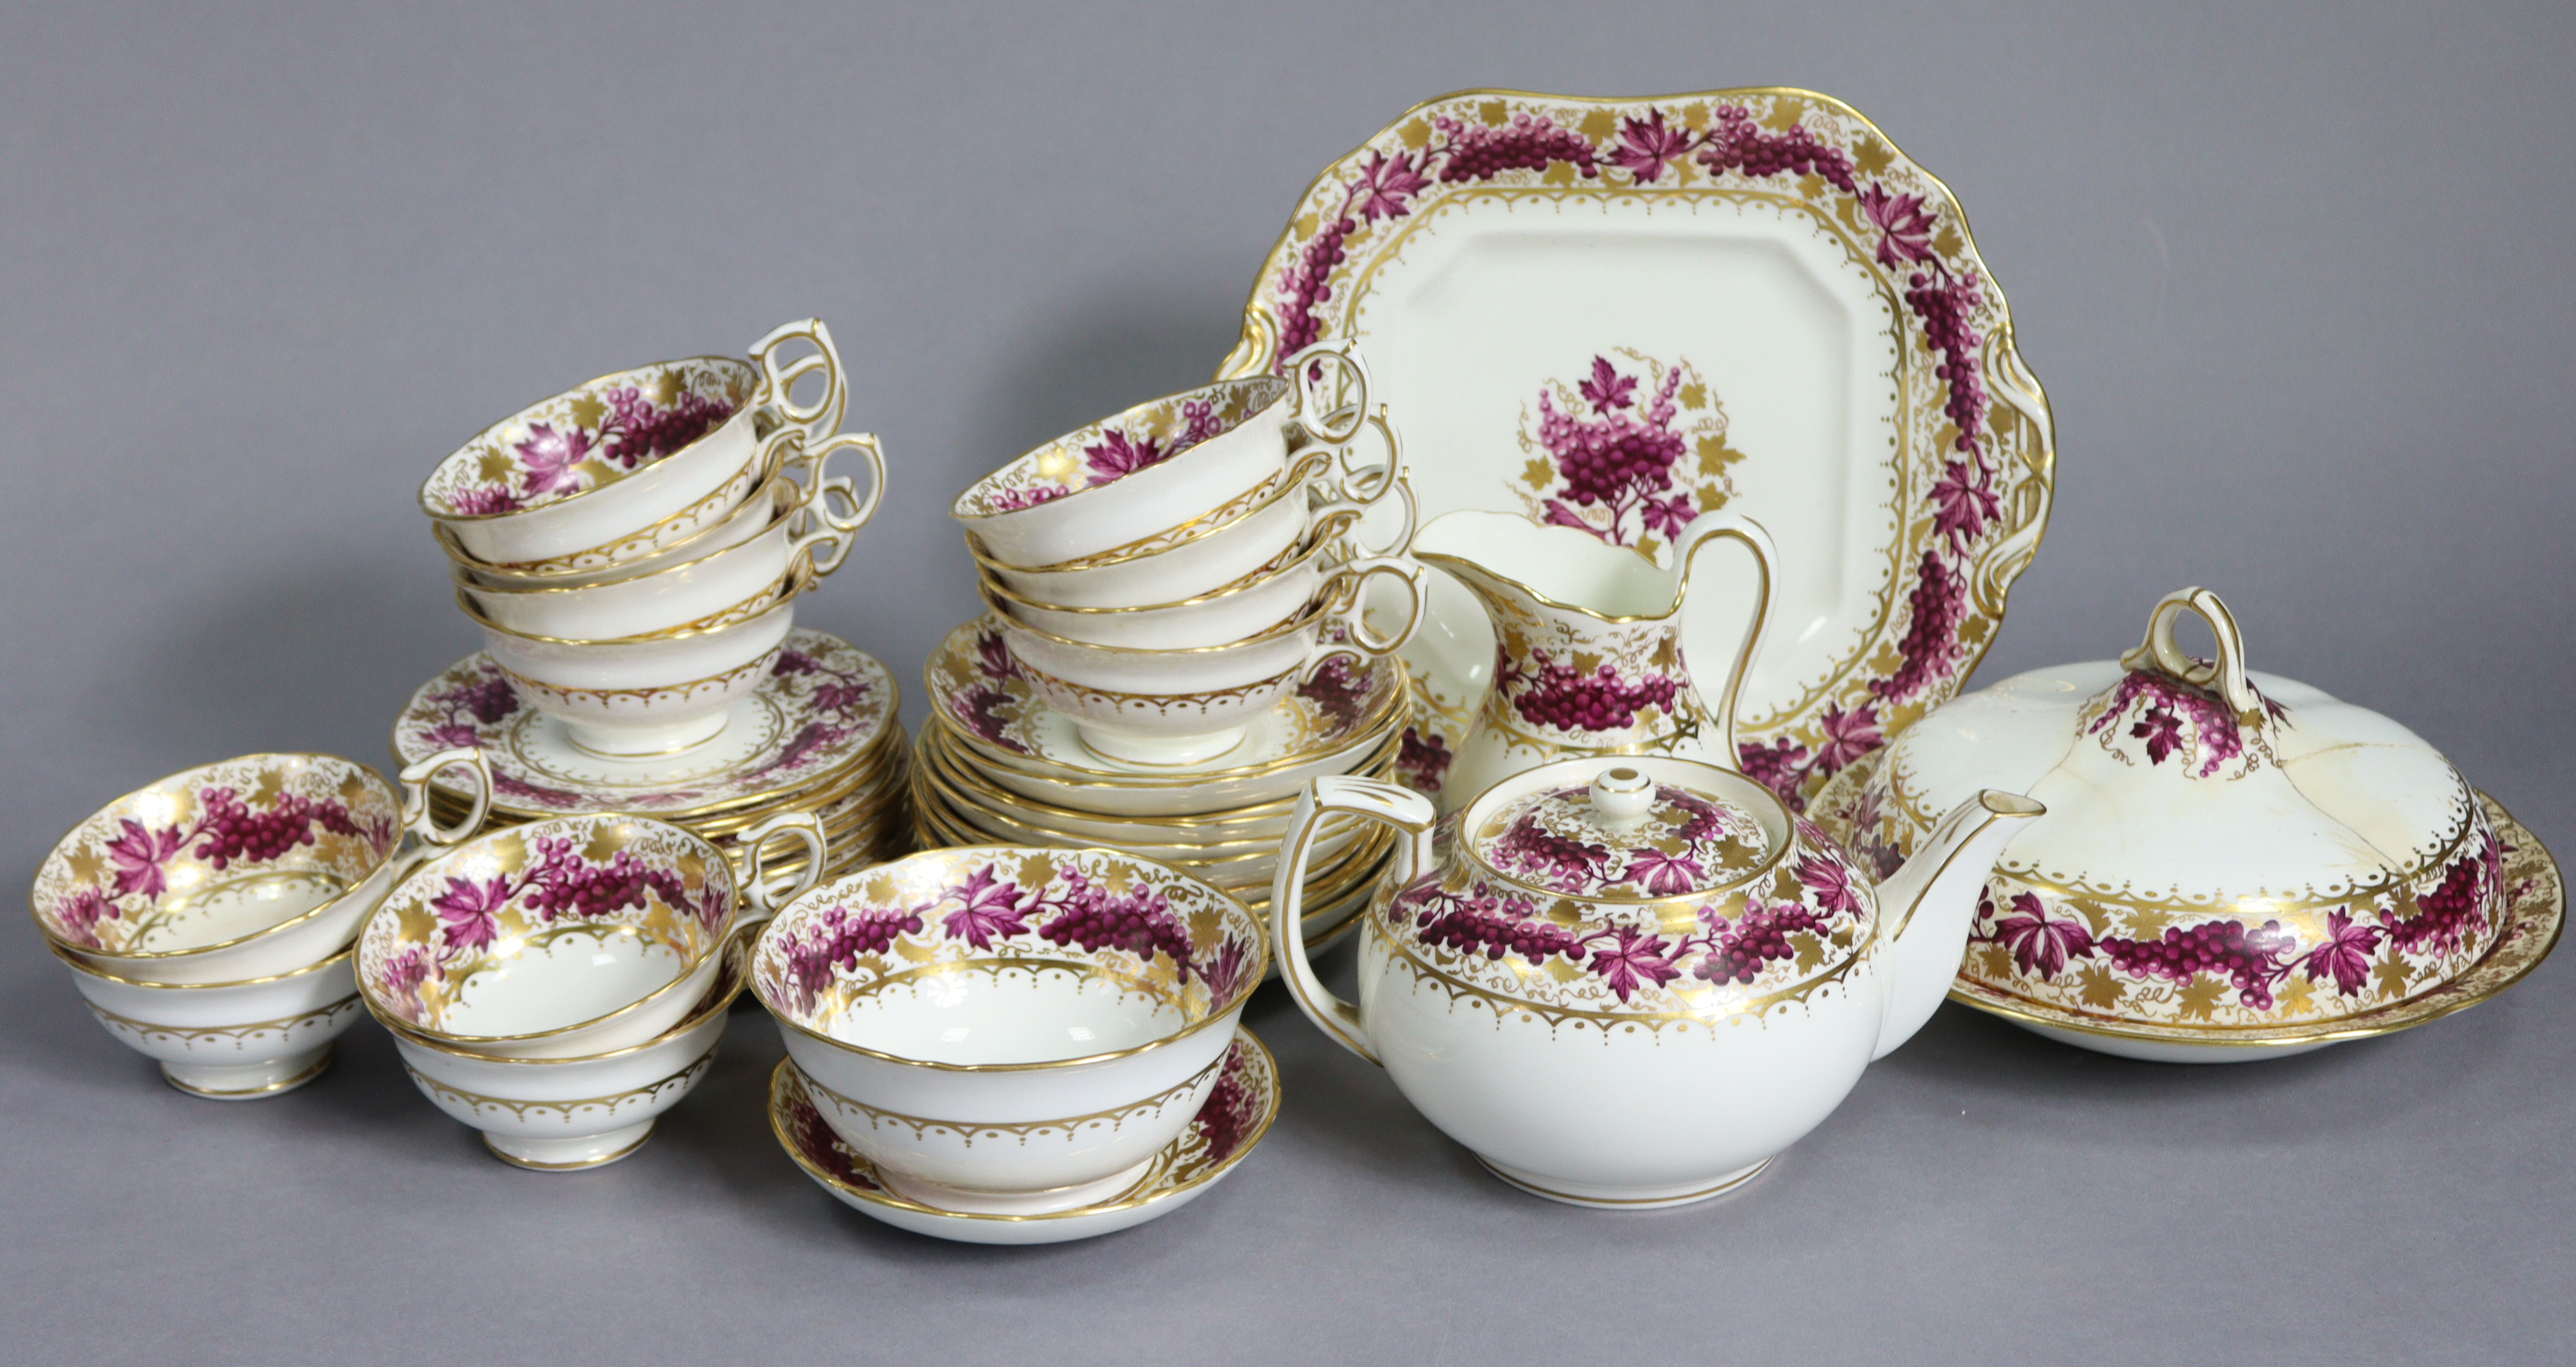 An early 20th century English porcelain tea service in the regency style, the wide borders decorated